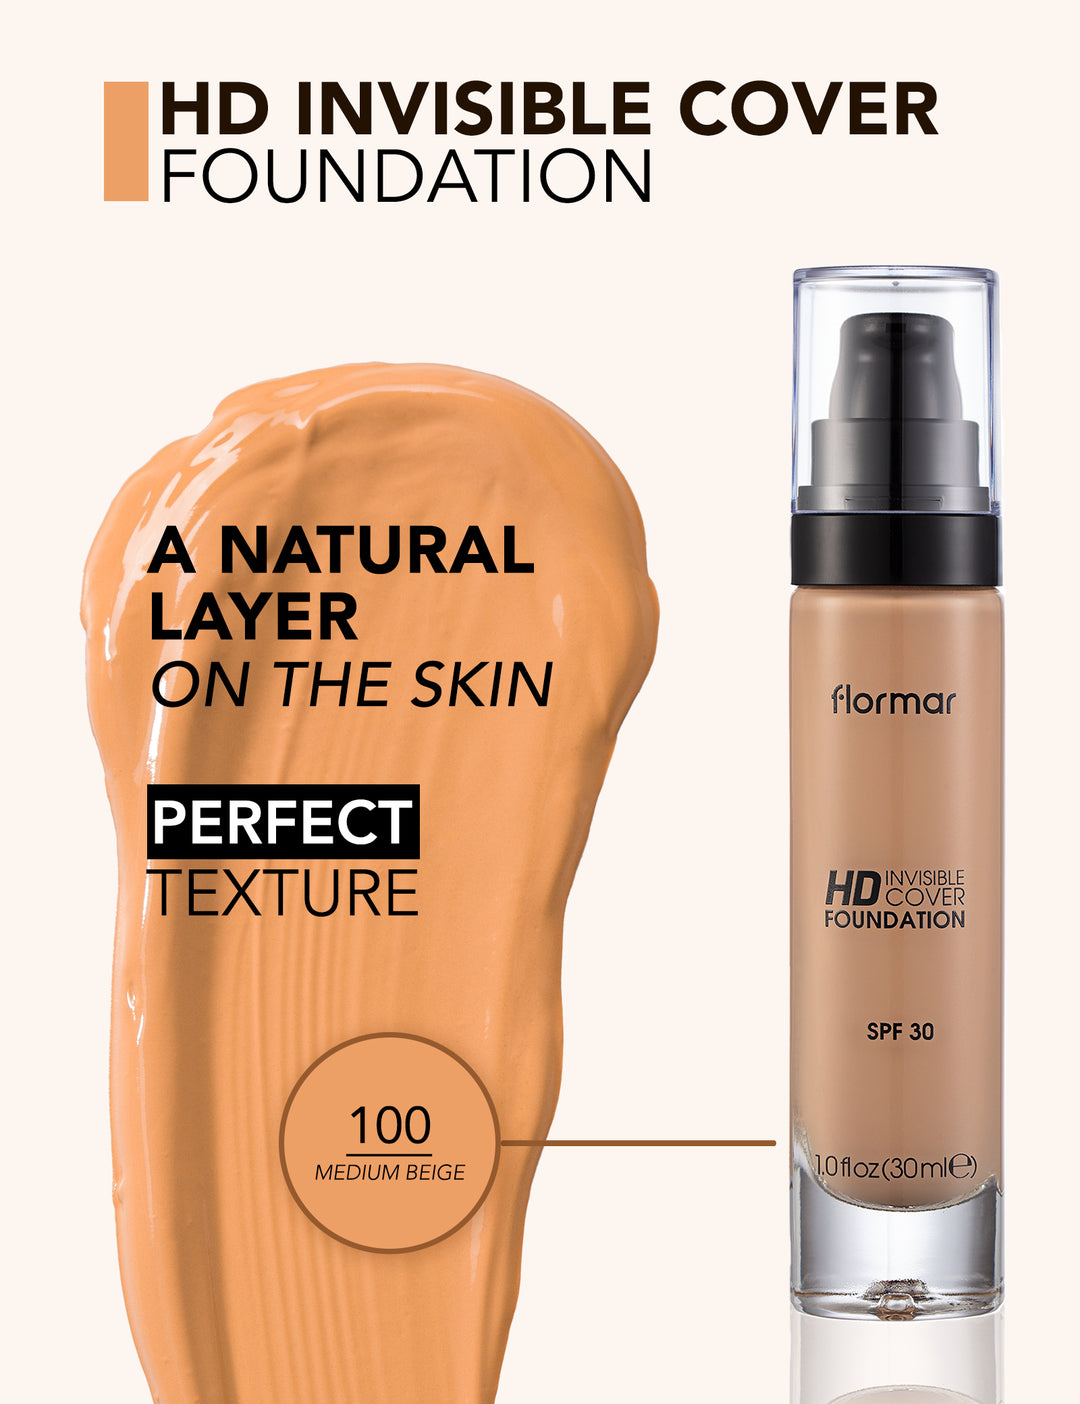 Flormar HD Invisible Cover Foundation